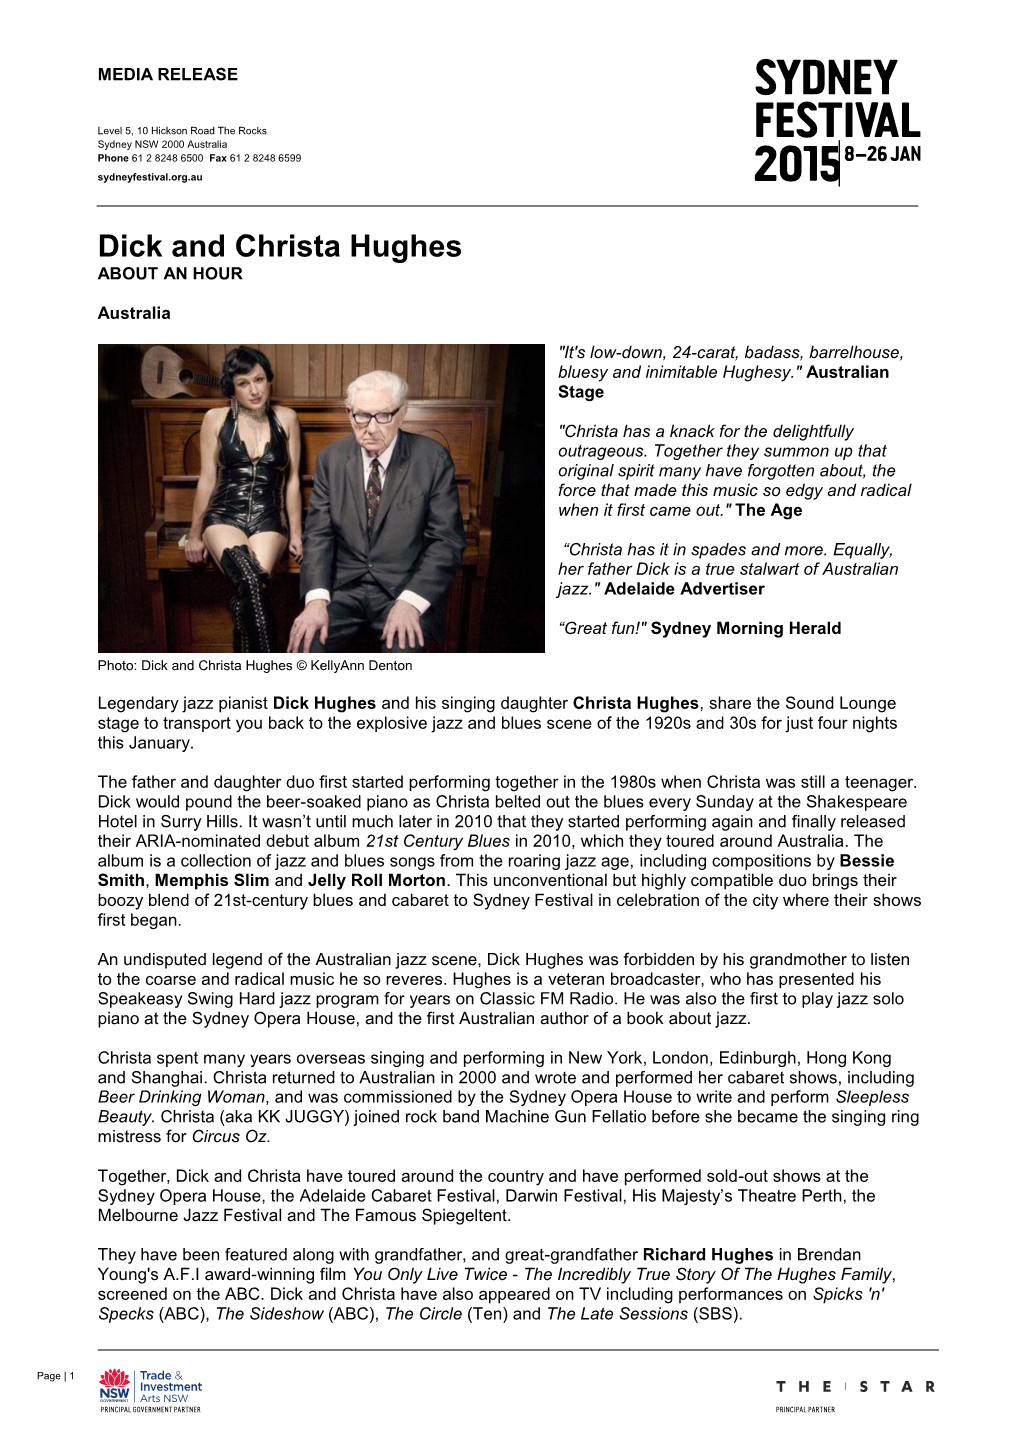 Dick and Christa Hughes ABOUT an HOUR